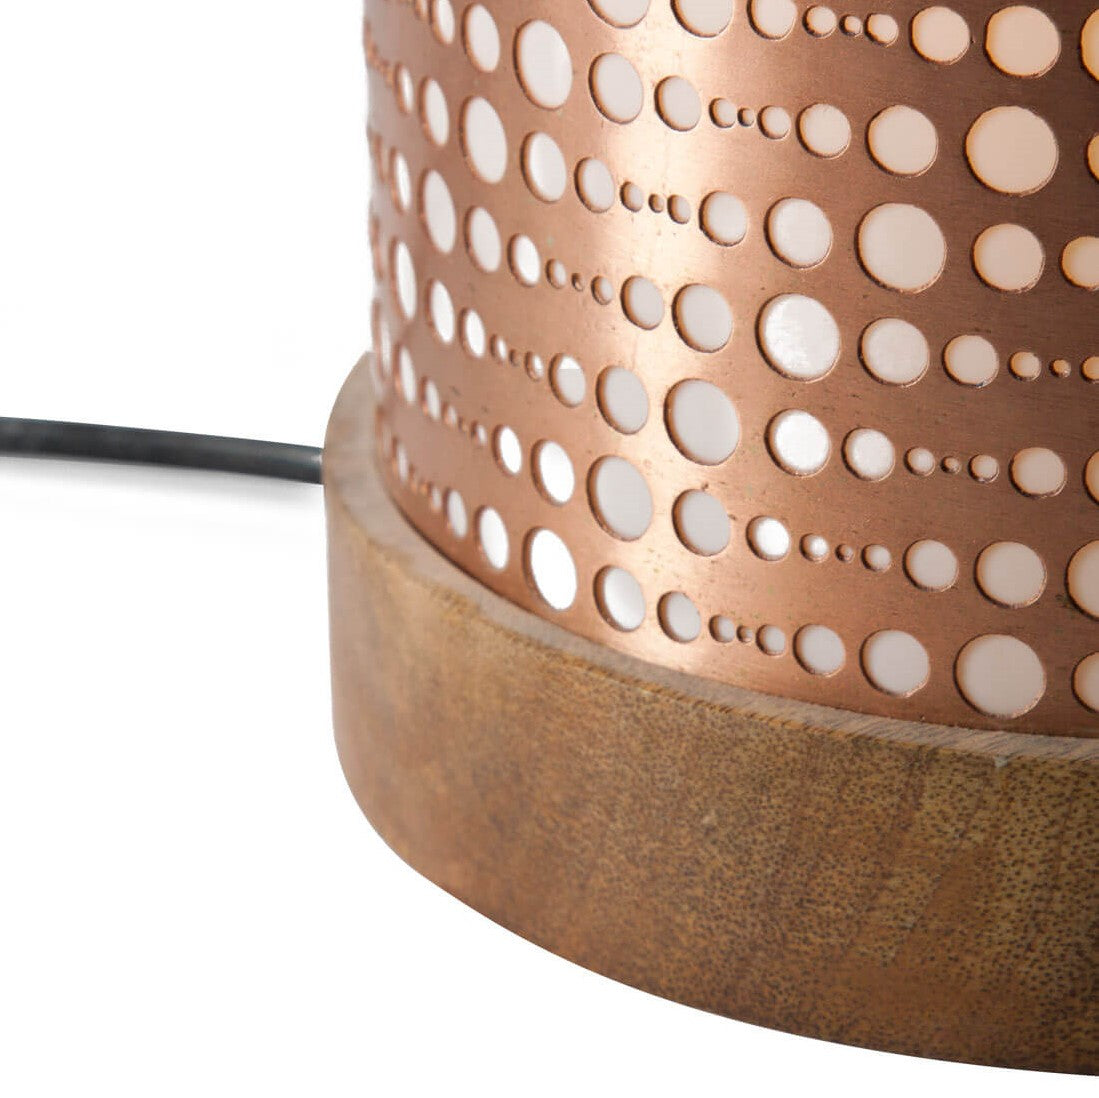 Cylo Table Lamp